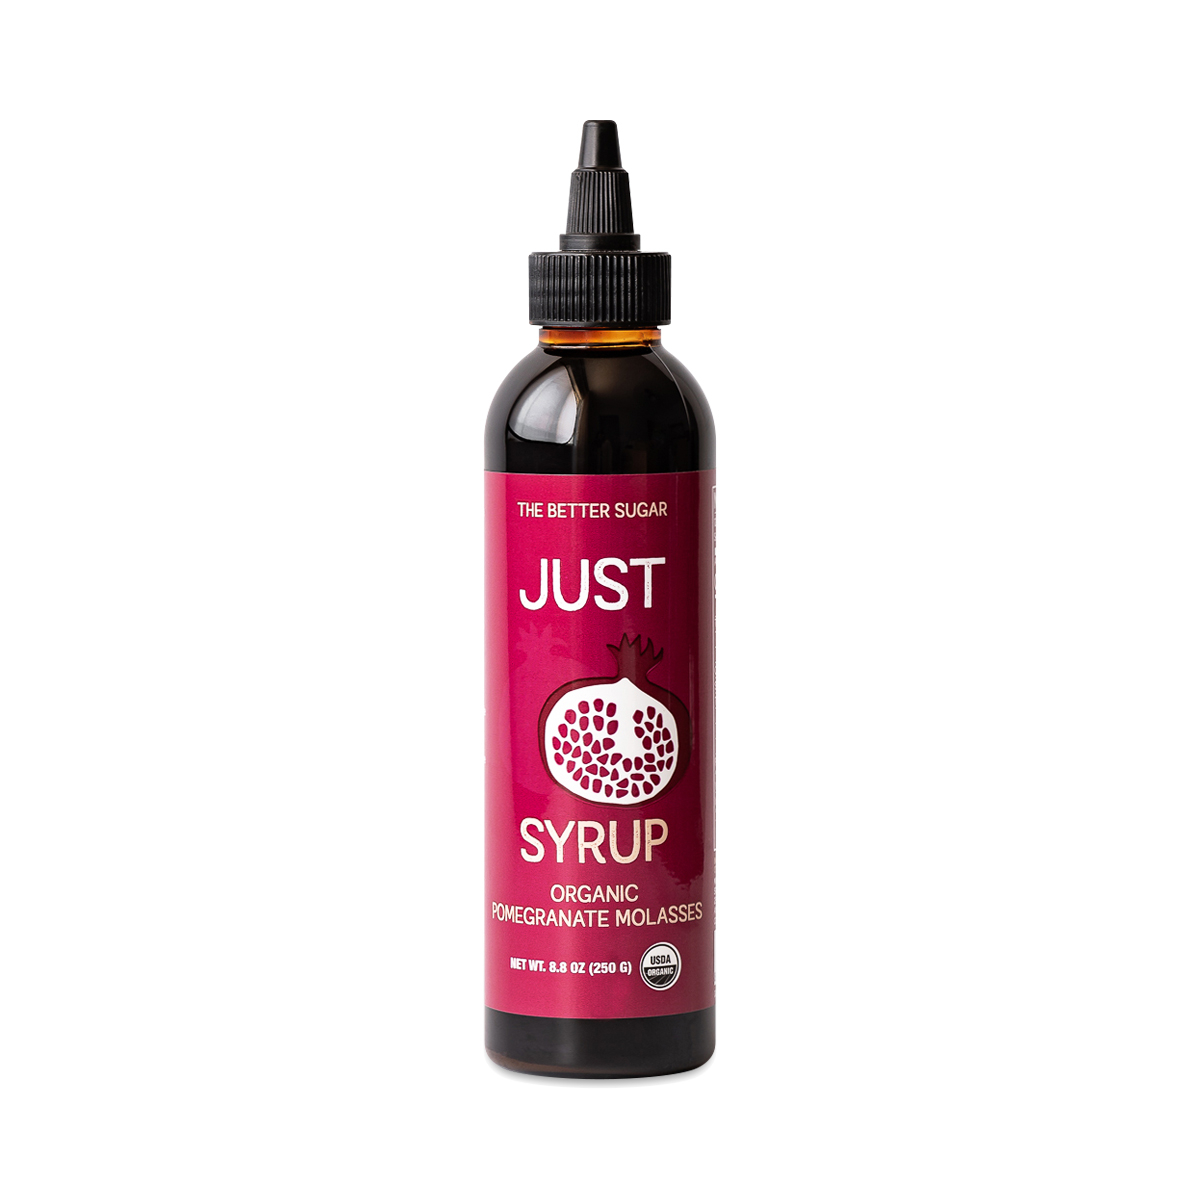 Just Date Syrup Organic Pomegranate Molasses 8.8 oz bottle